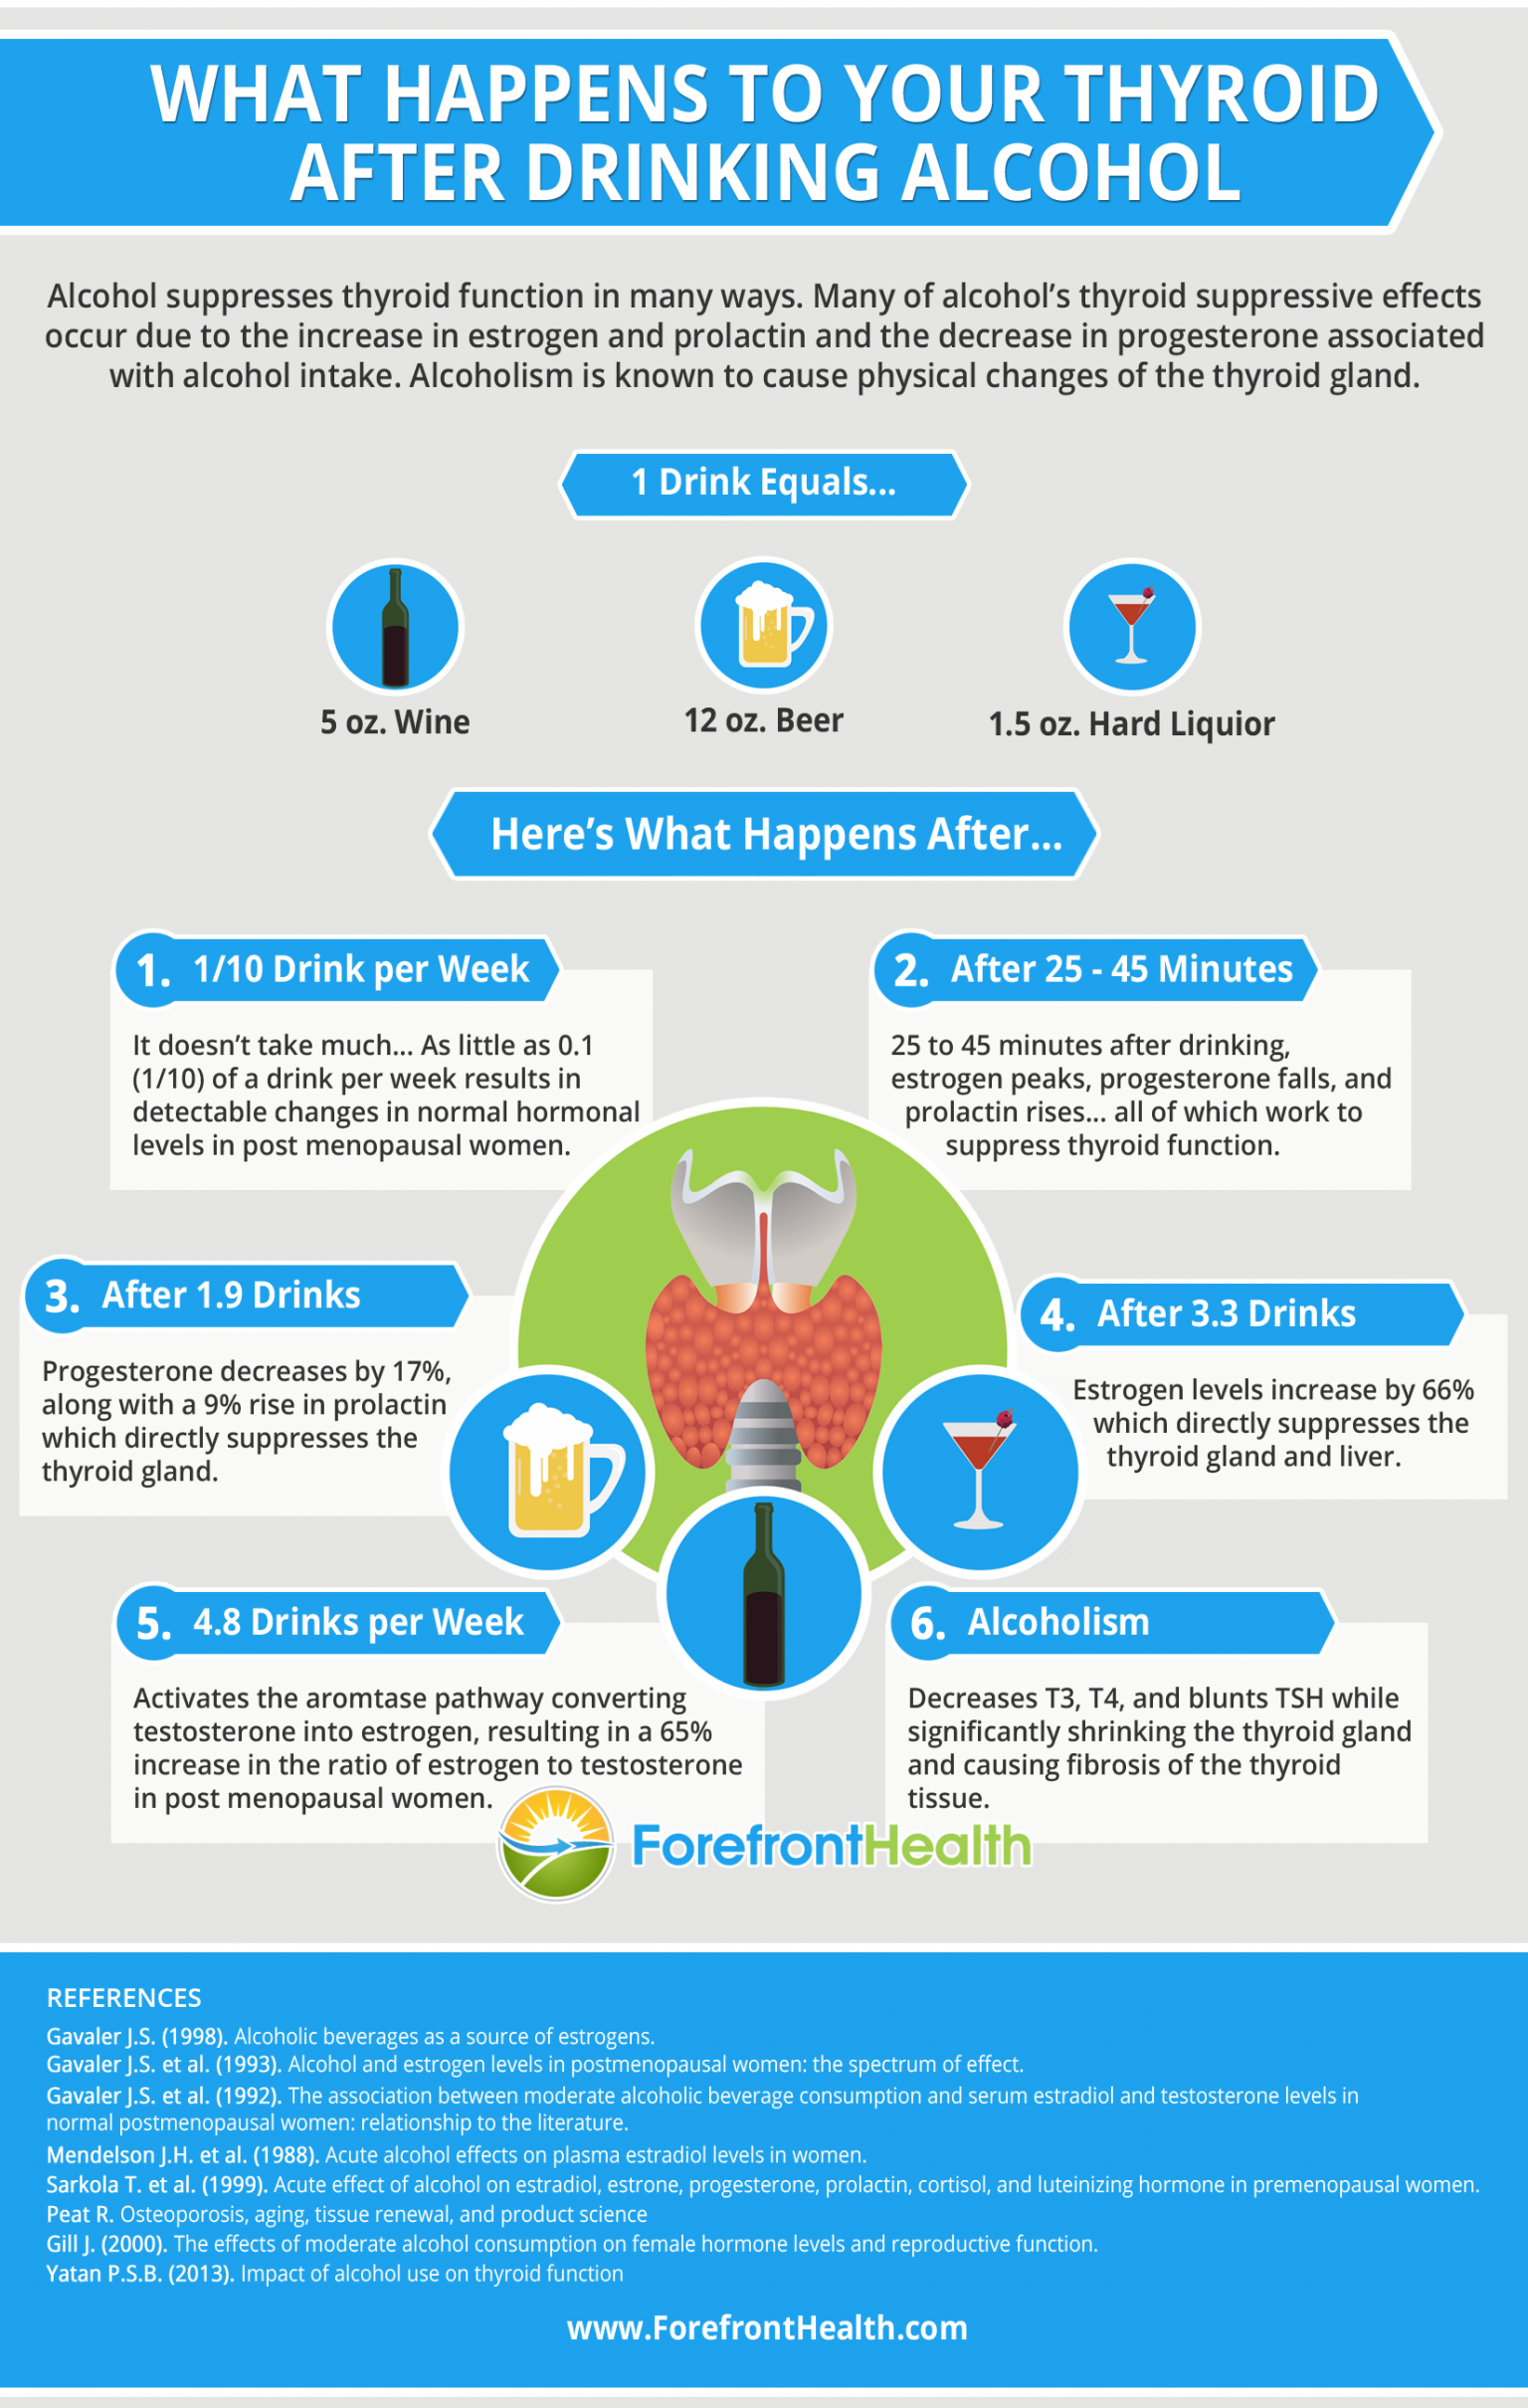 An infographic of what happens to your thyroid after drinking alcohol.